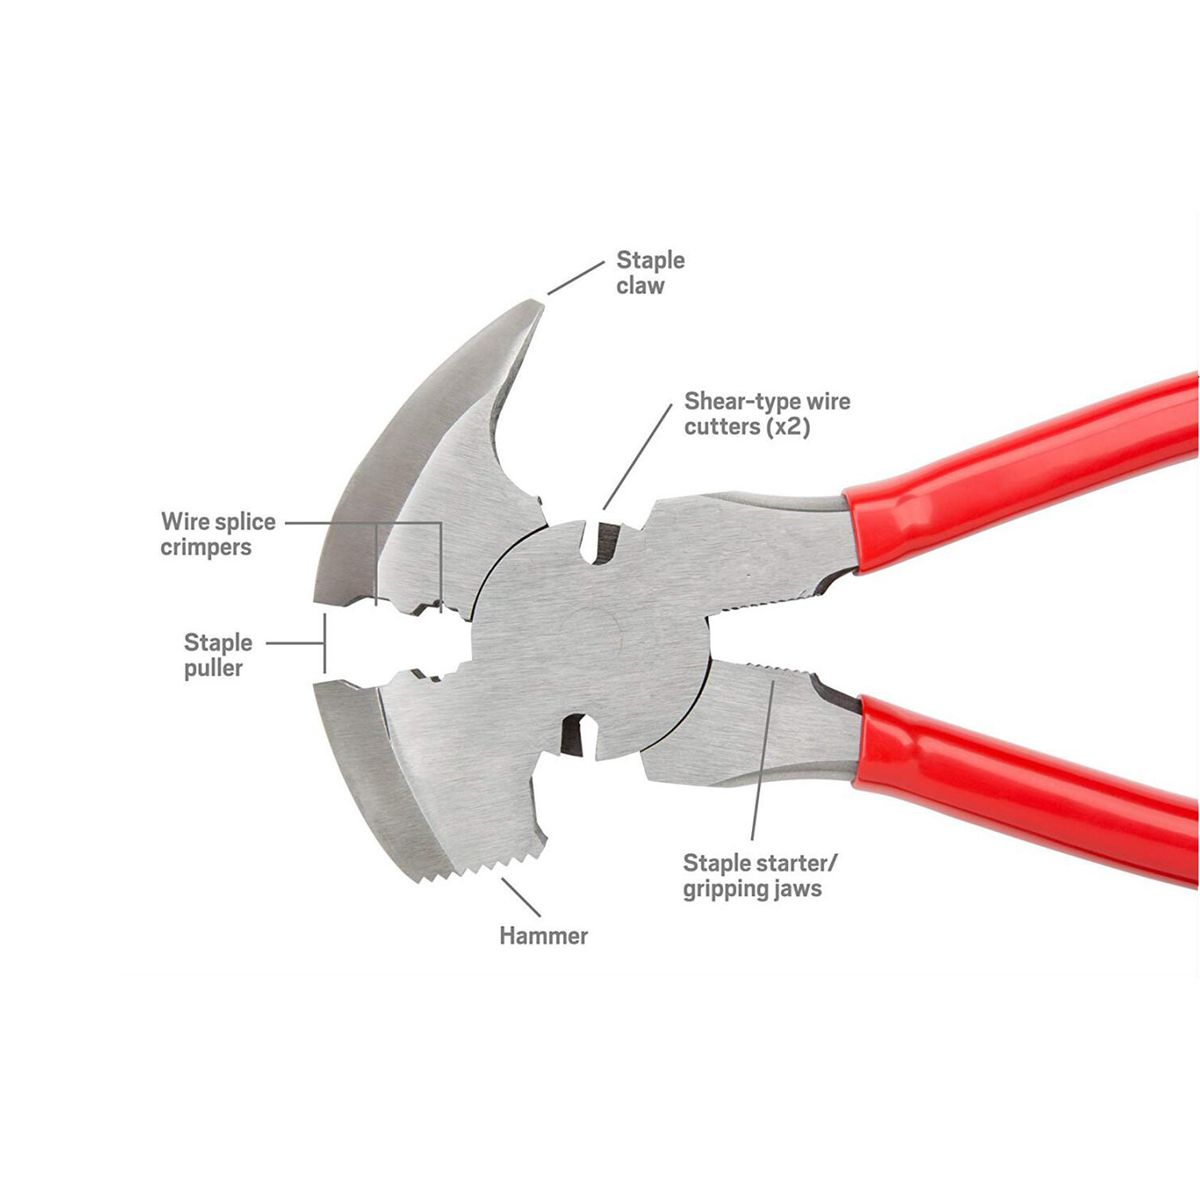 10inch-Fence-Pliers-Parallel-Jaws-Soft-Grip-Wire-Cutter-Fencing-Hammer-Tool-1575366